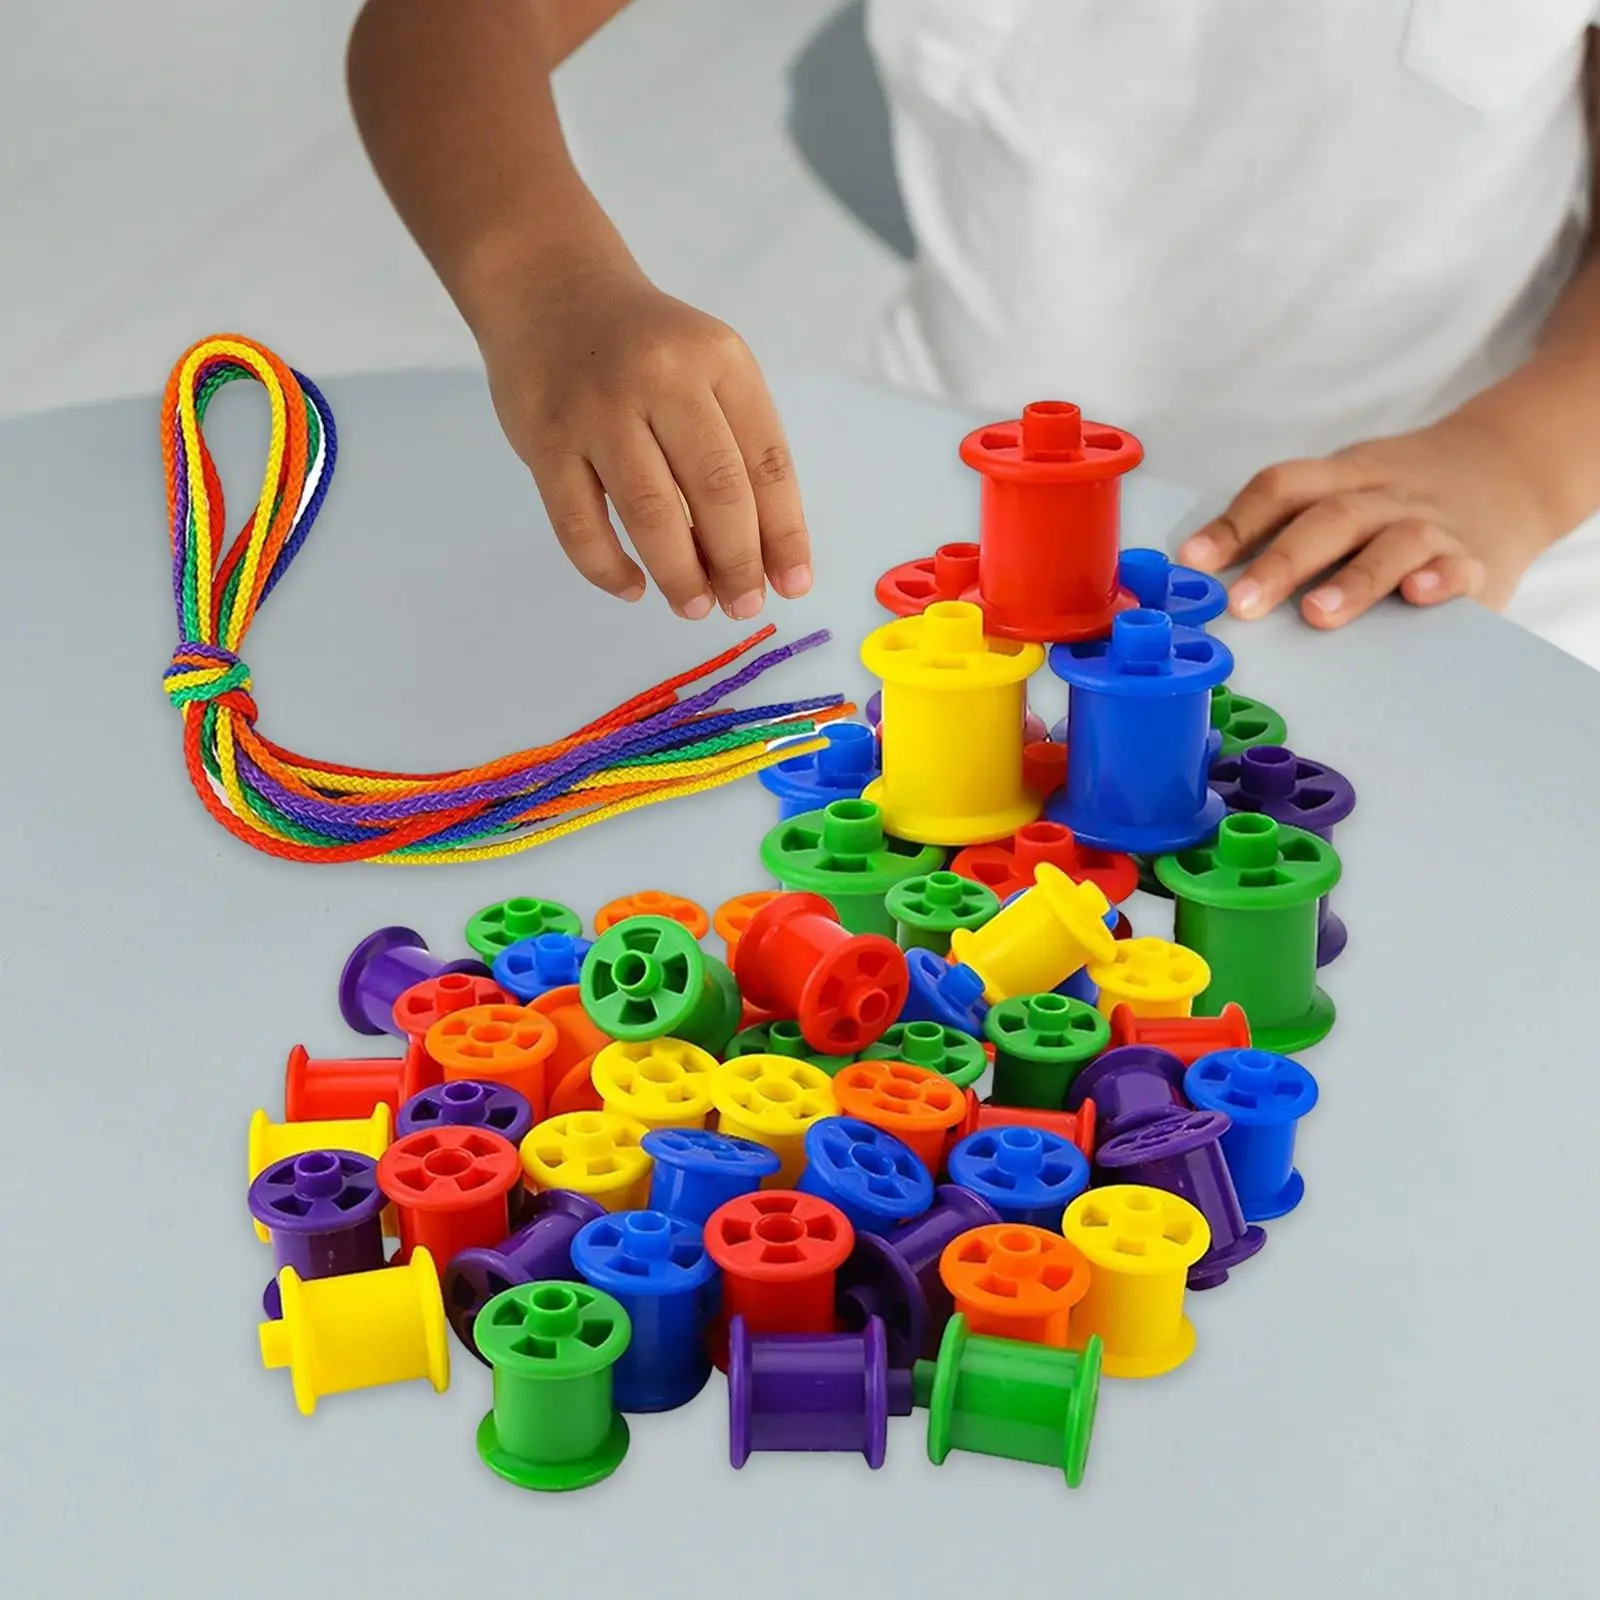 Lacing Beads Toy Early Education Gifts Color Sorting for Learning Activities Daycare